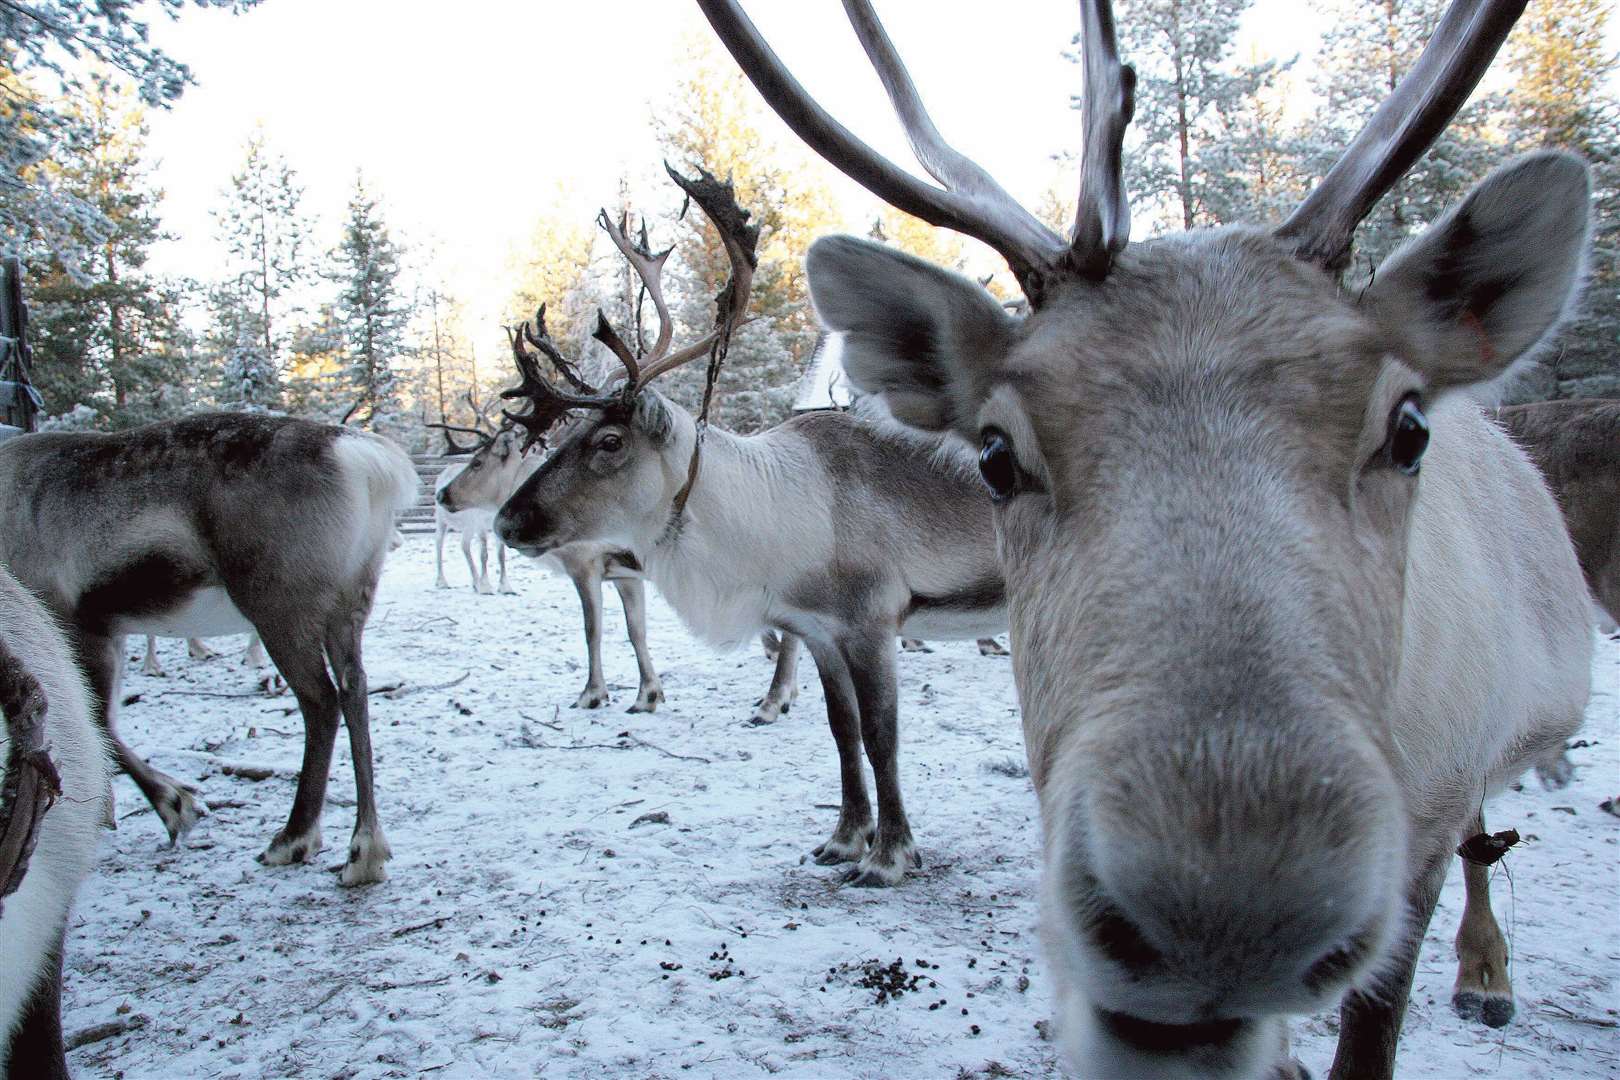 Some discarded chocolate chips might suggest the reindeer have made a visit from Lapland. Image: PA.